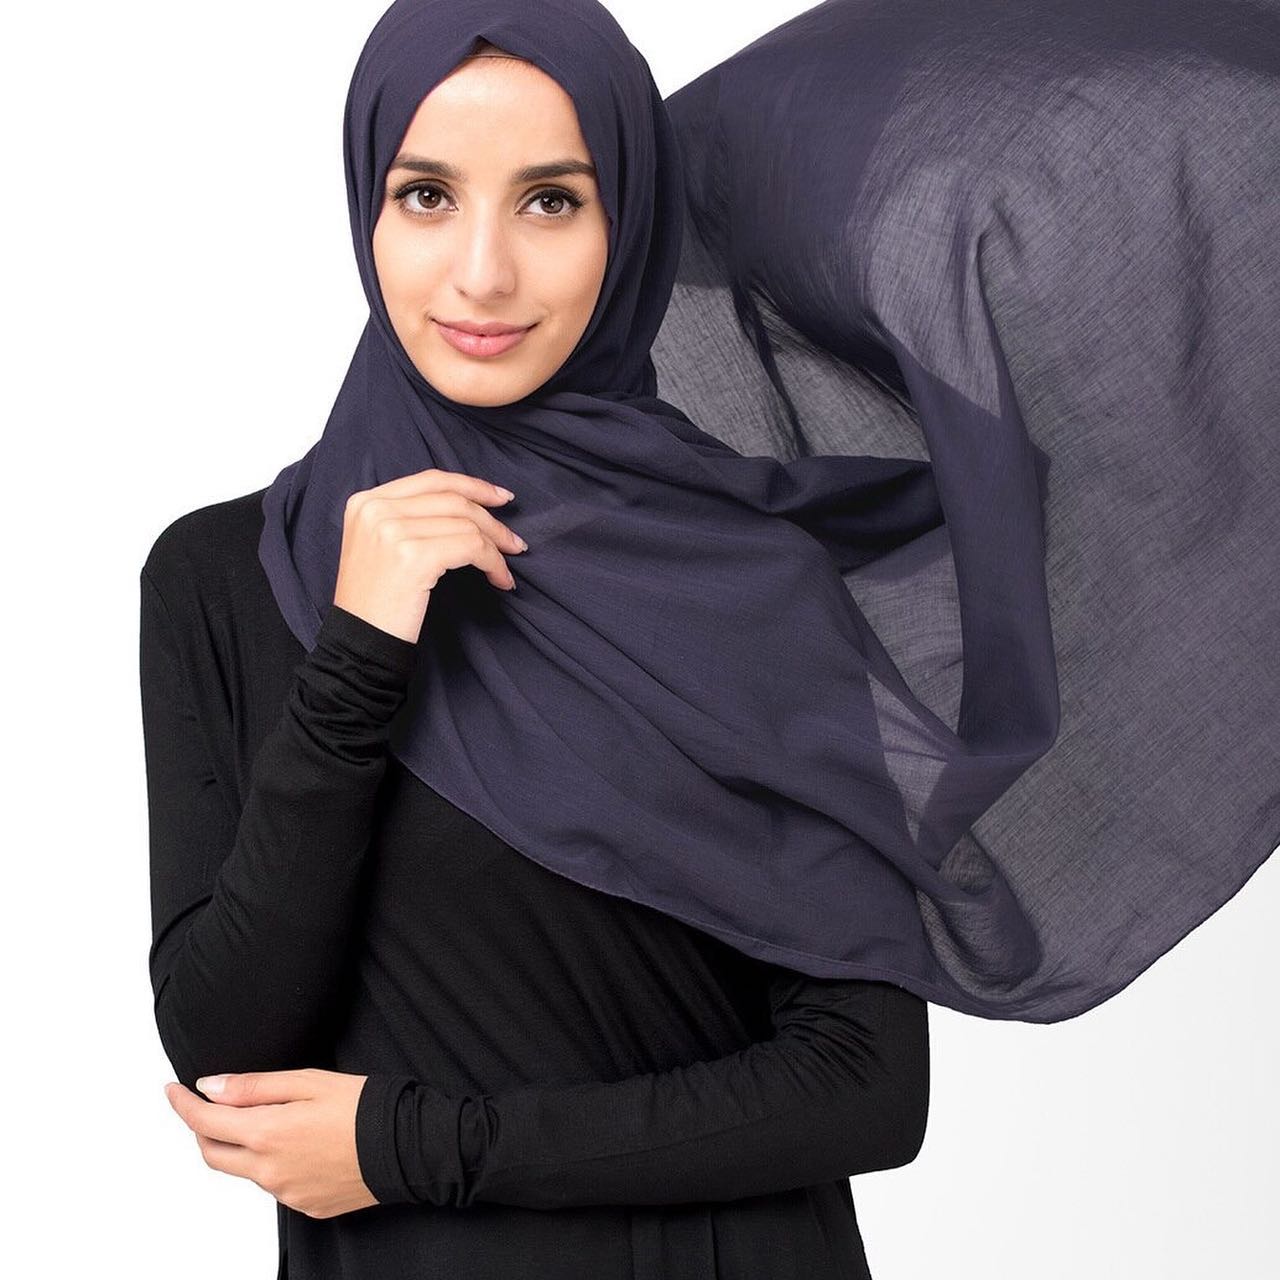 Made from high quality viscose, this lightweight hijab is suitable for year-long wear. With a subtle sheen on one side, it adds elegance to an everyday hijab without compromising comfort.